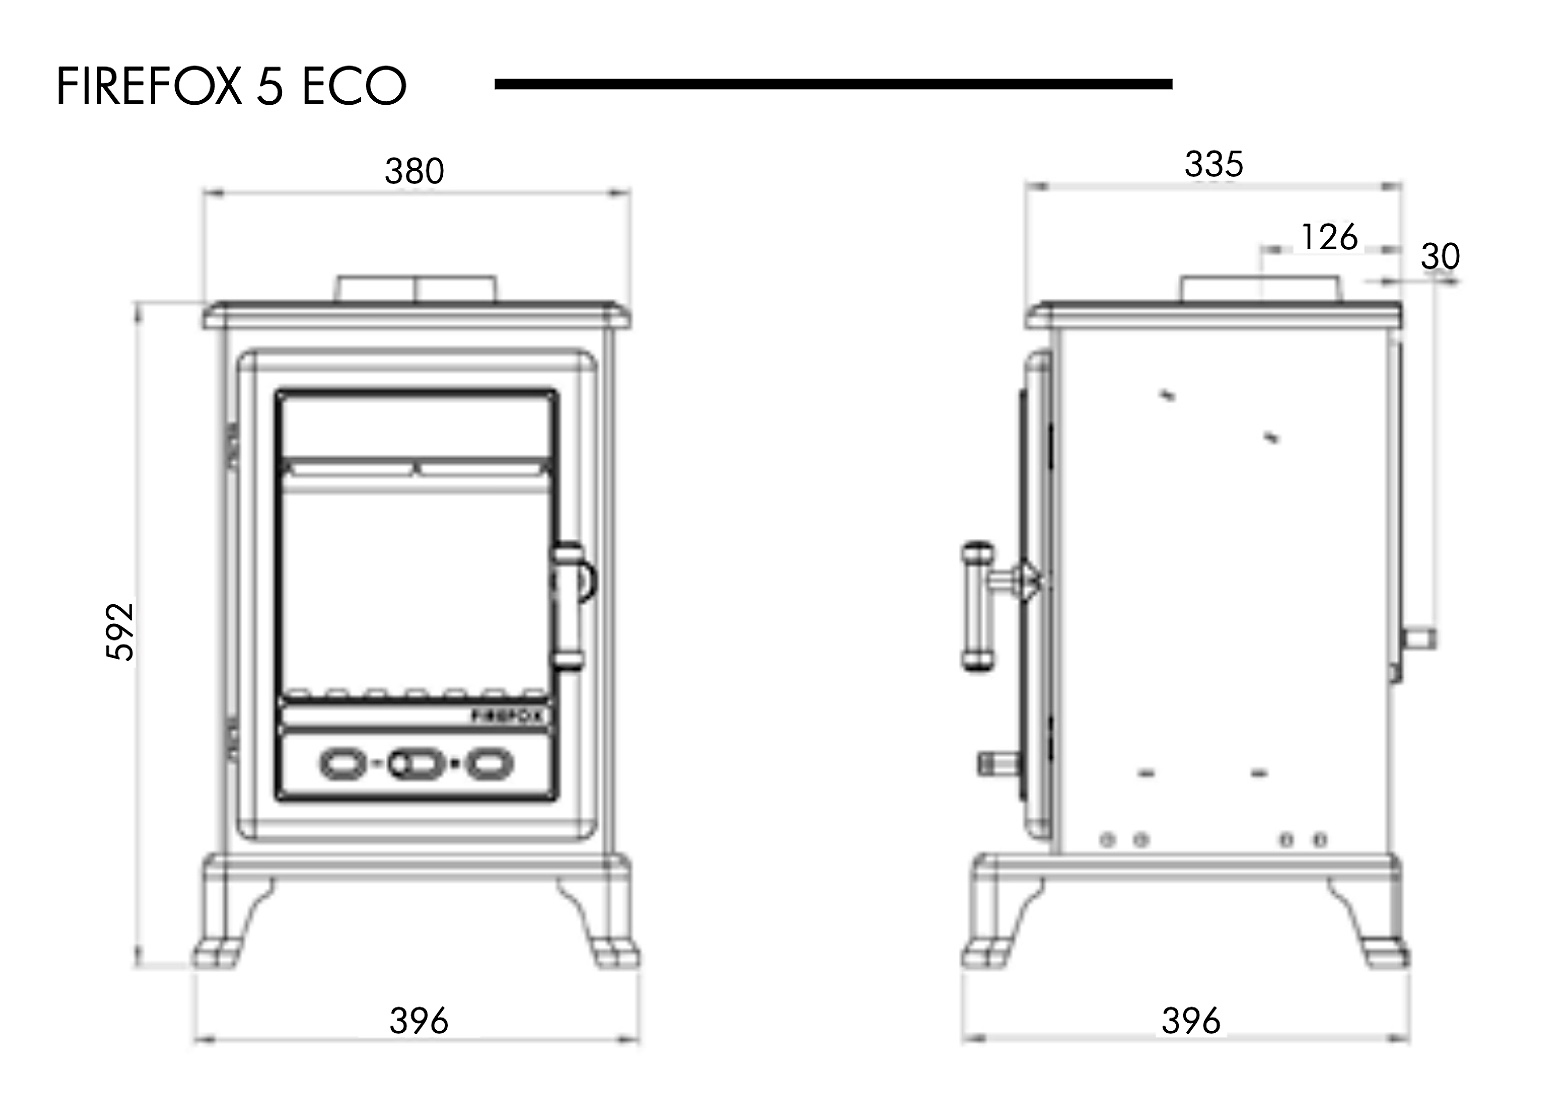 Gallery Collection Firefox 5 Eco Multifuel Stove Dimensions